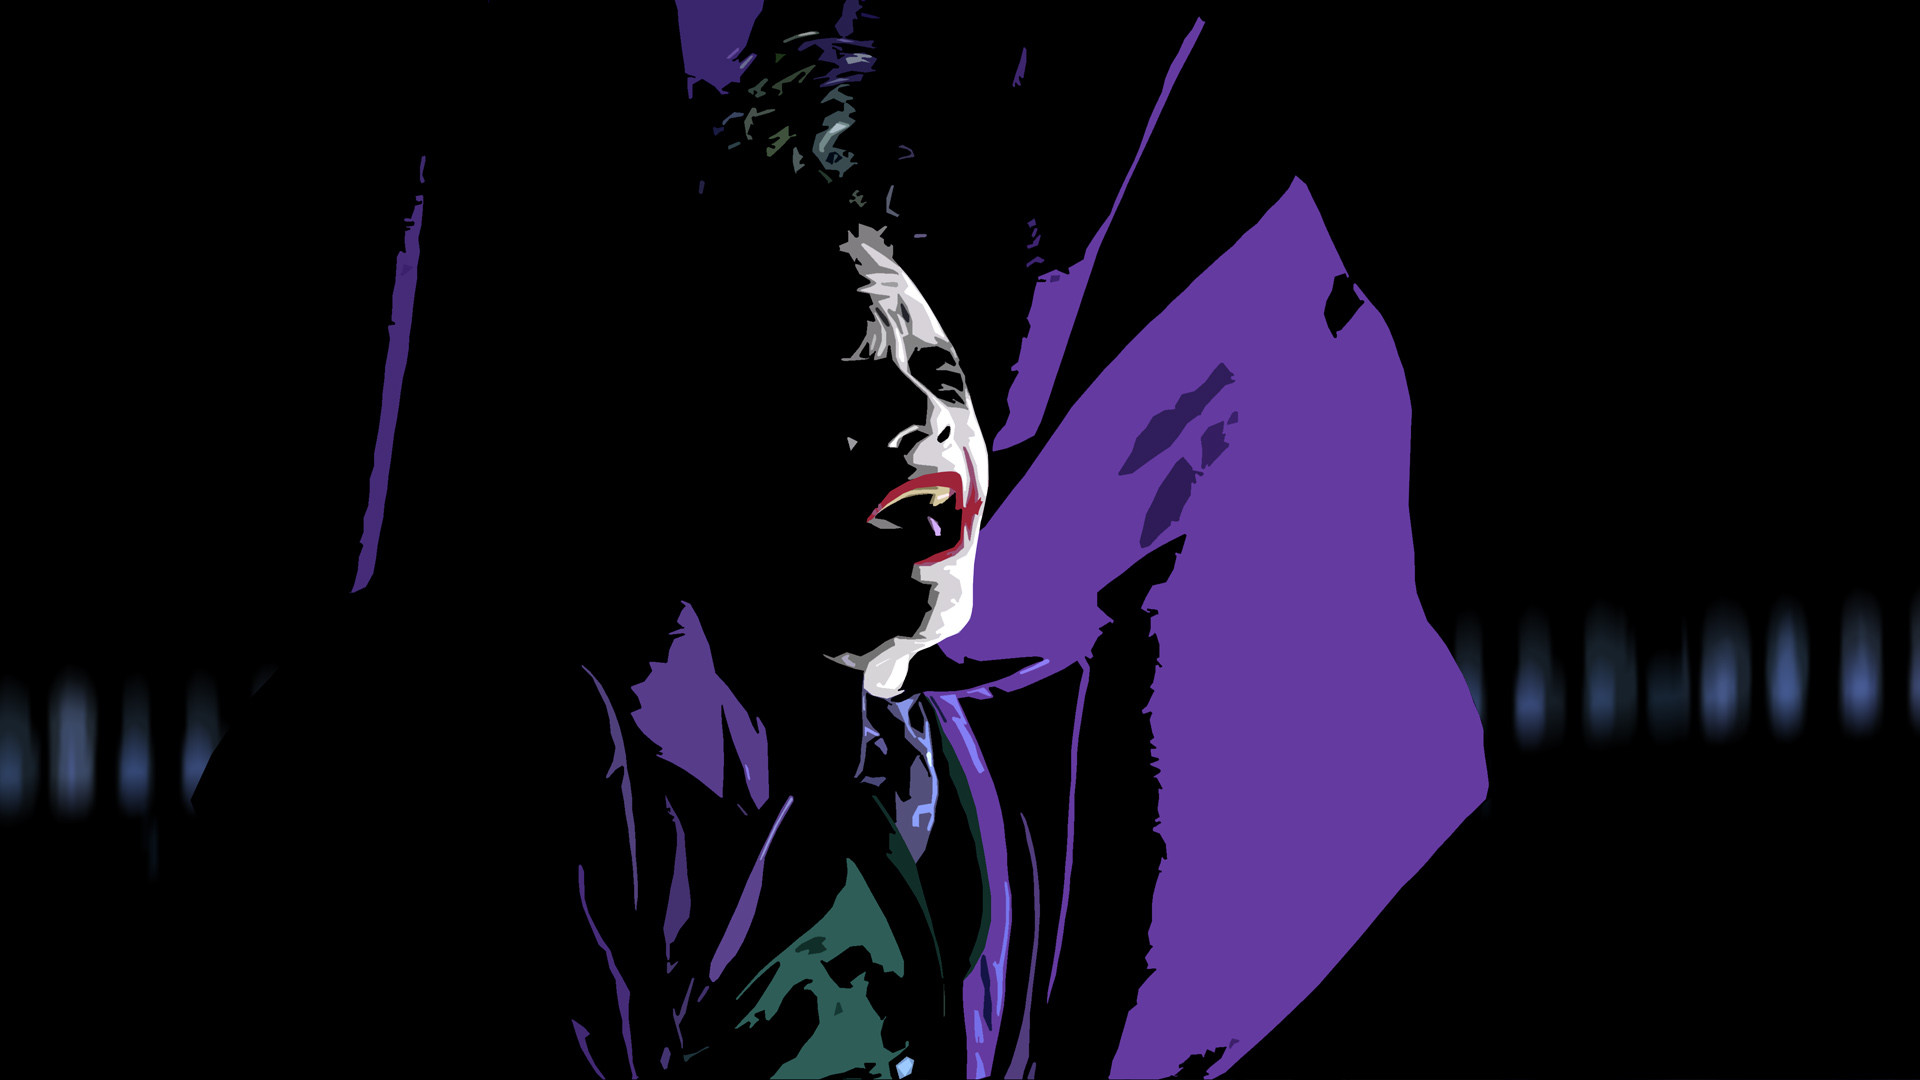 Backgrounds For Animated Joker Hd Wallpapers 1080p